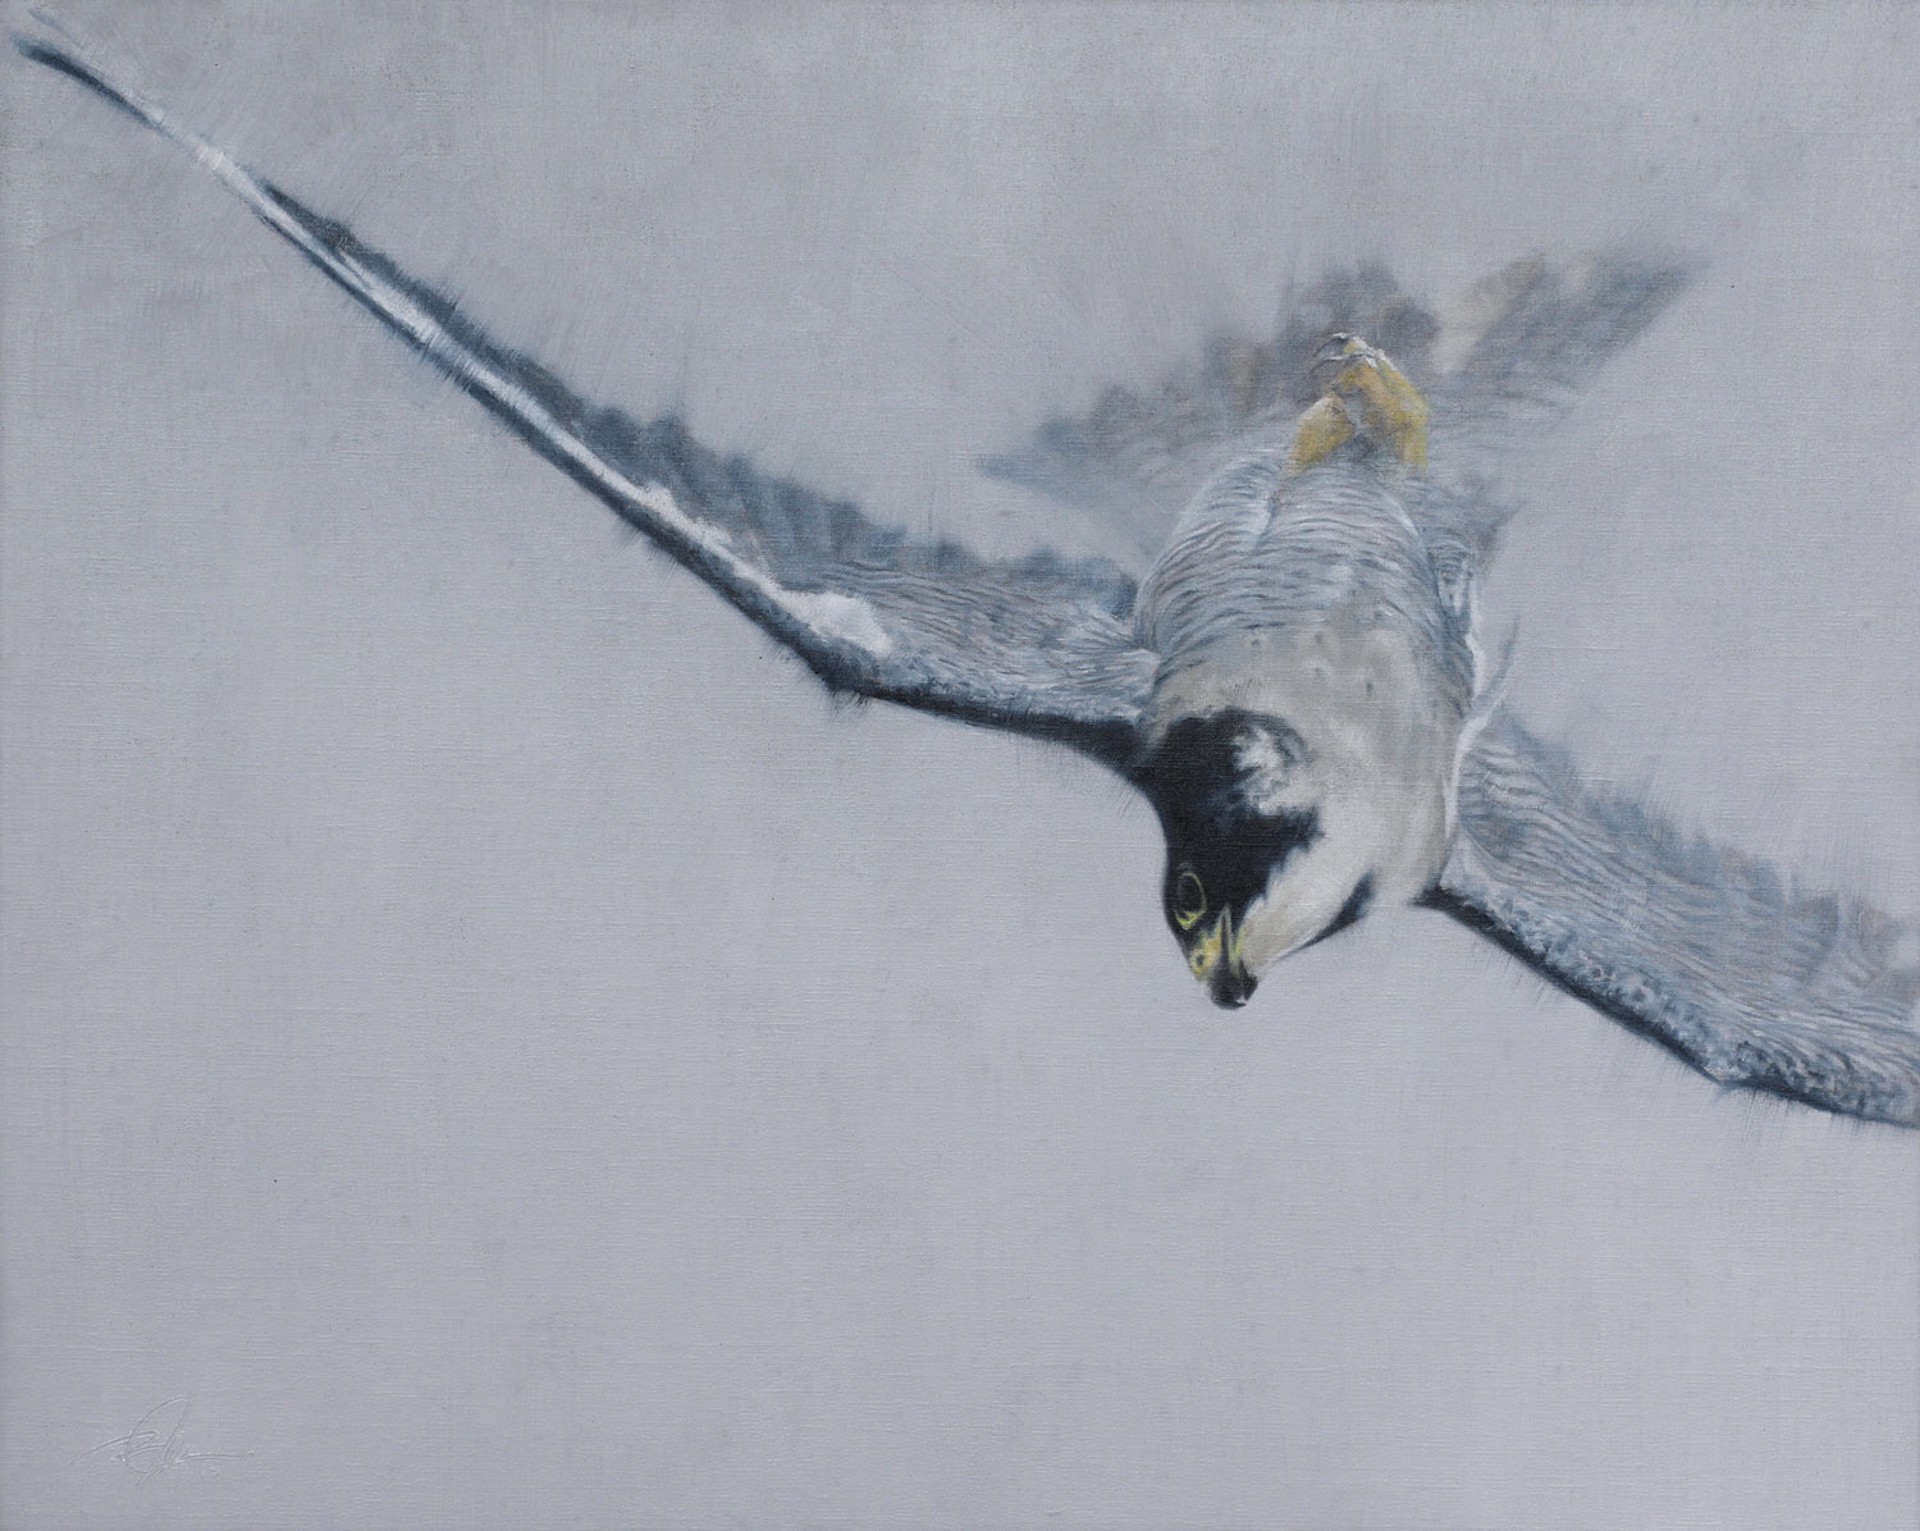 A Contemporary Black And White Painting Of A Peregrine Falcon In Flight By Doyle Hostetler At Gallery Wild